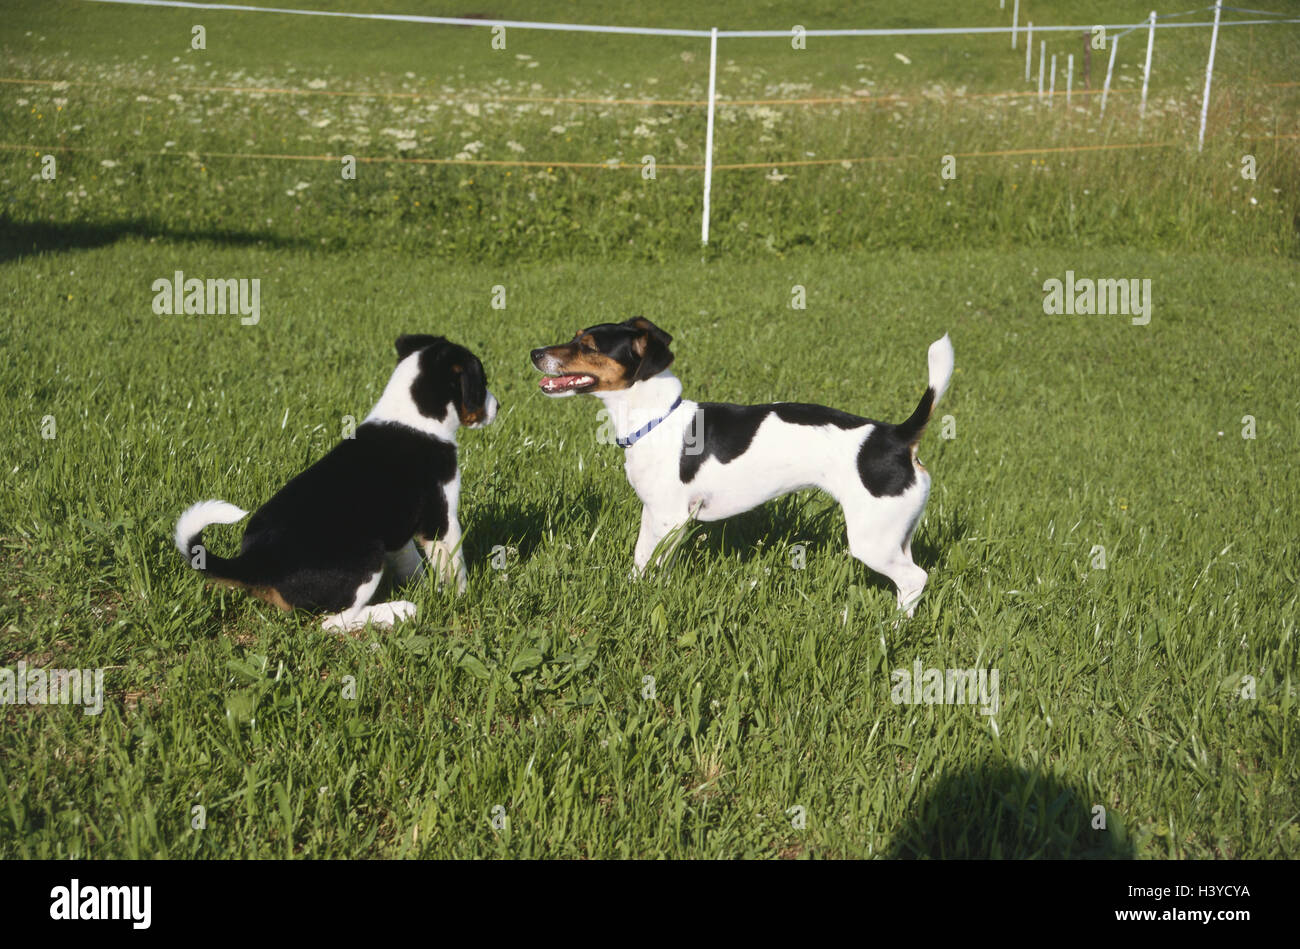 Dogs, Jack Russell terriers, hybrid dog, young, meadow, mammals, pets, Alpine dairyman's dog's hybrid, pedigree dog, hybrid, young animal, interest, curiosity, establishment contact, social behaviour, behaviour, outside Stock Photo